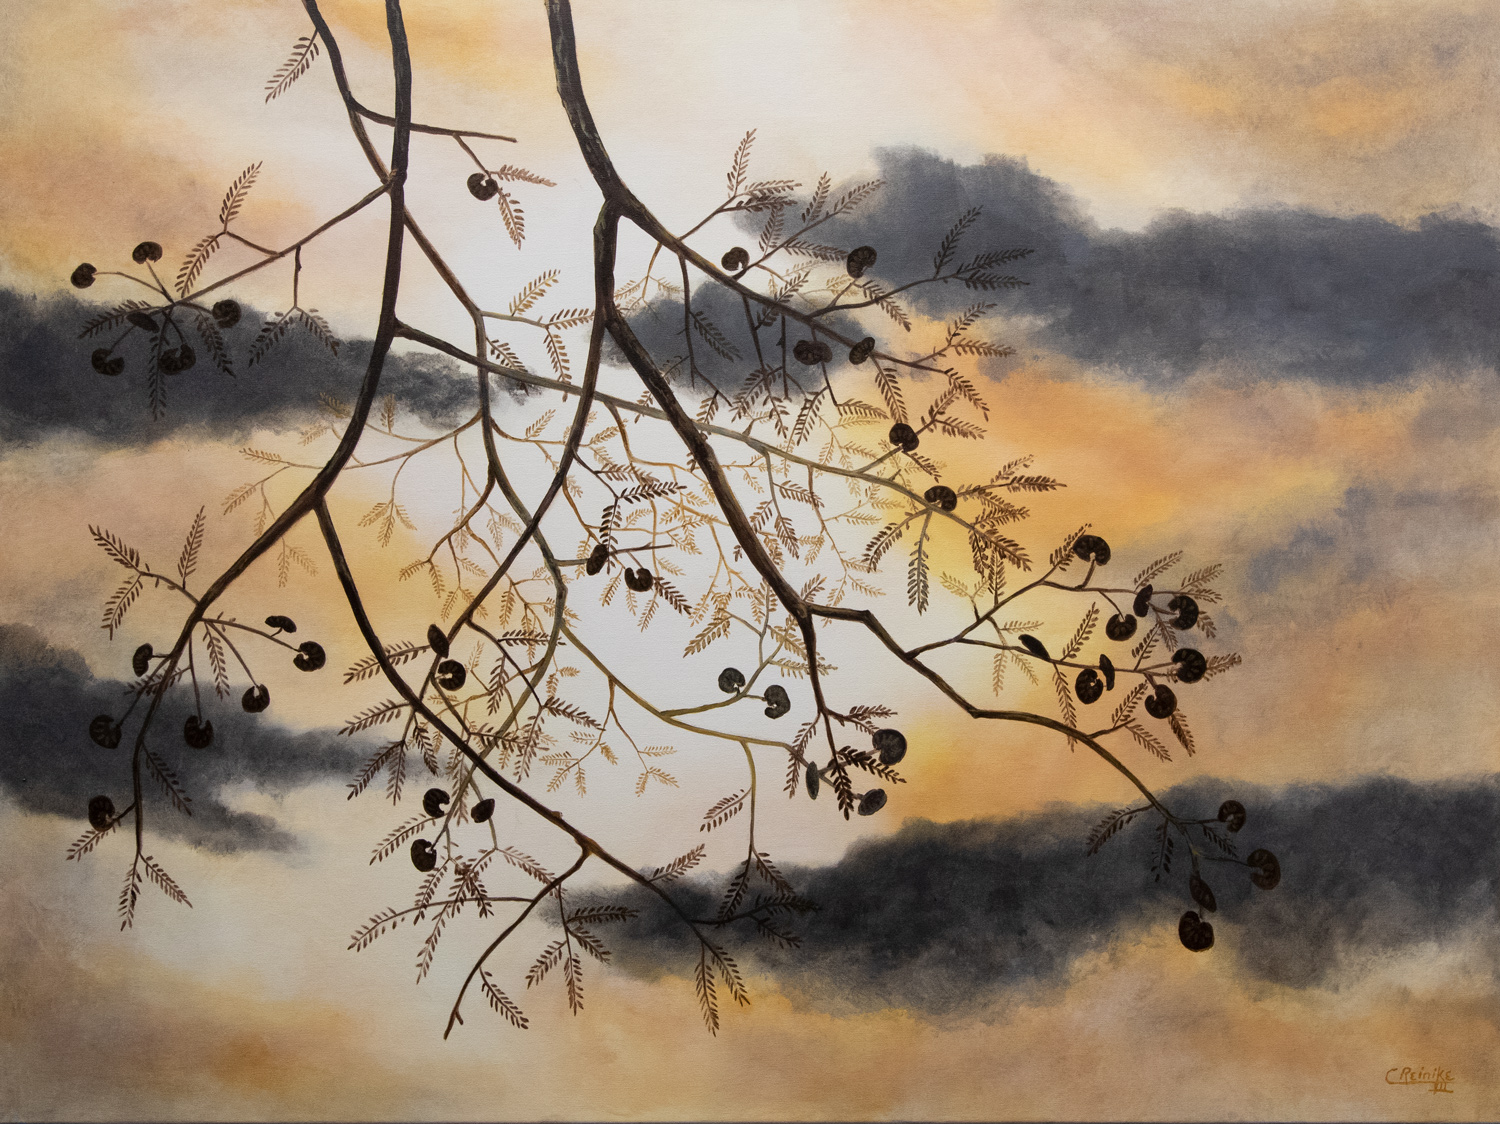 Guanacaste Lace at Sunset 36 X 48 by Charles H. Reinike III